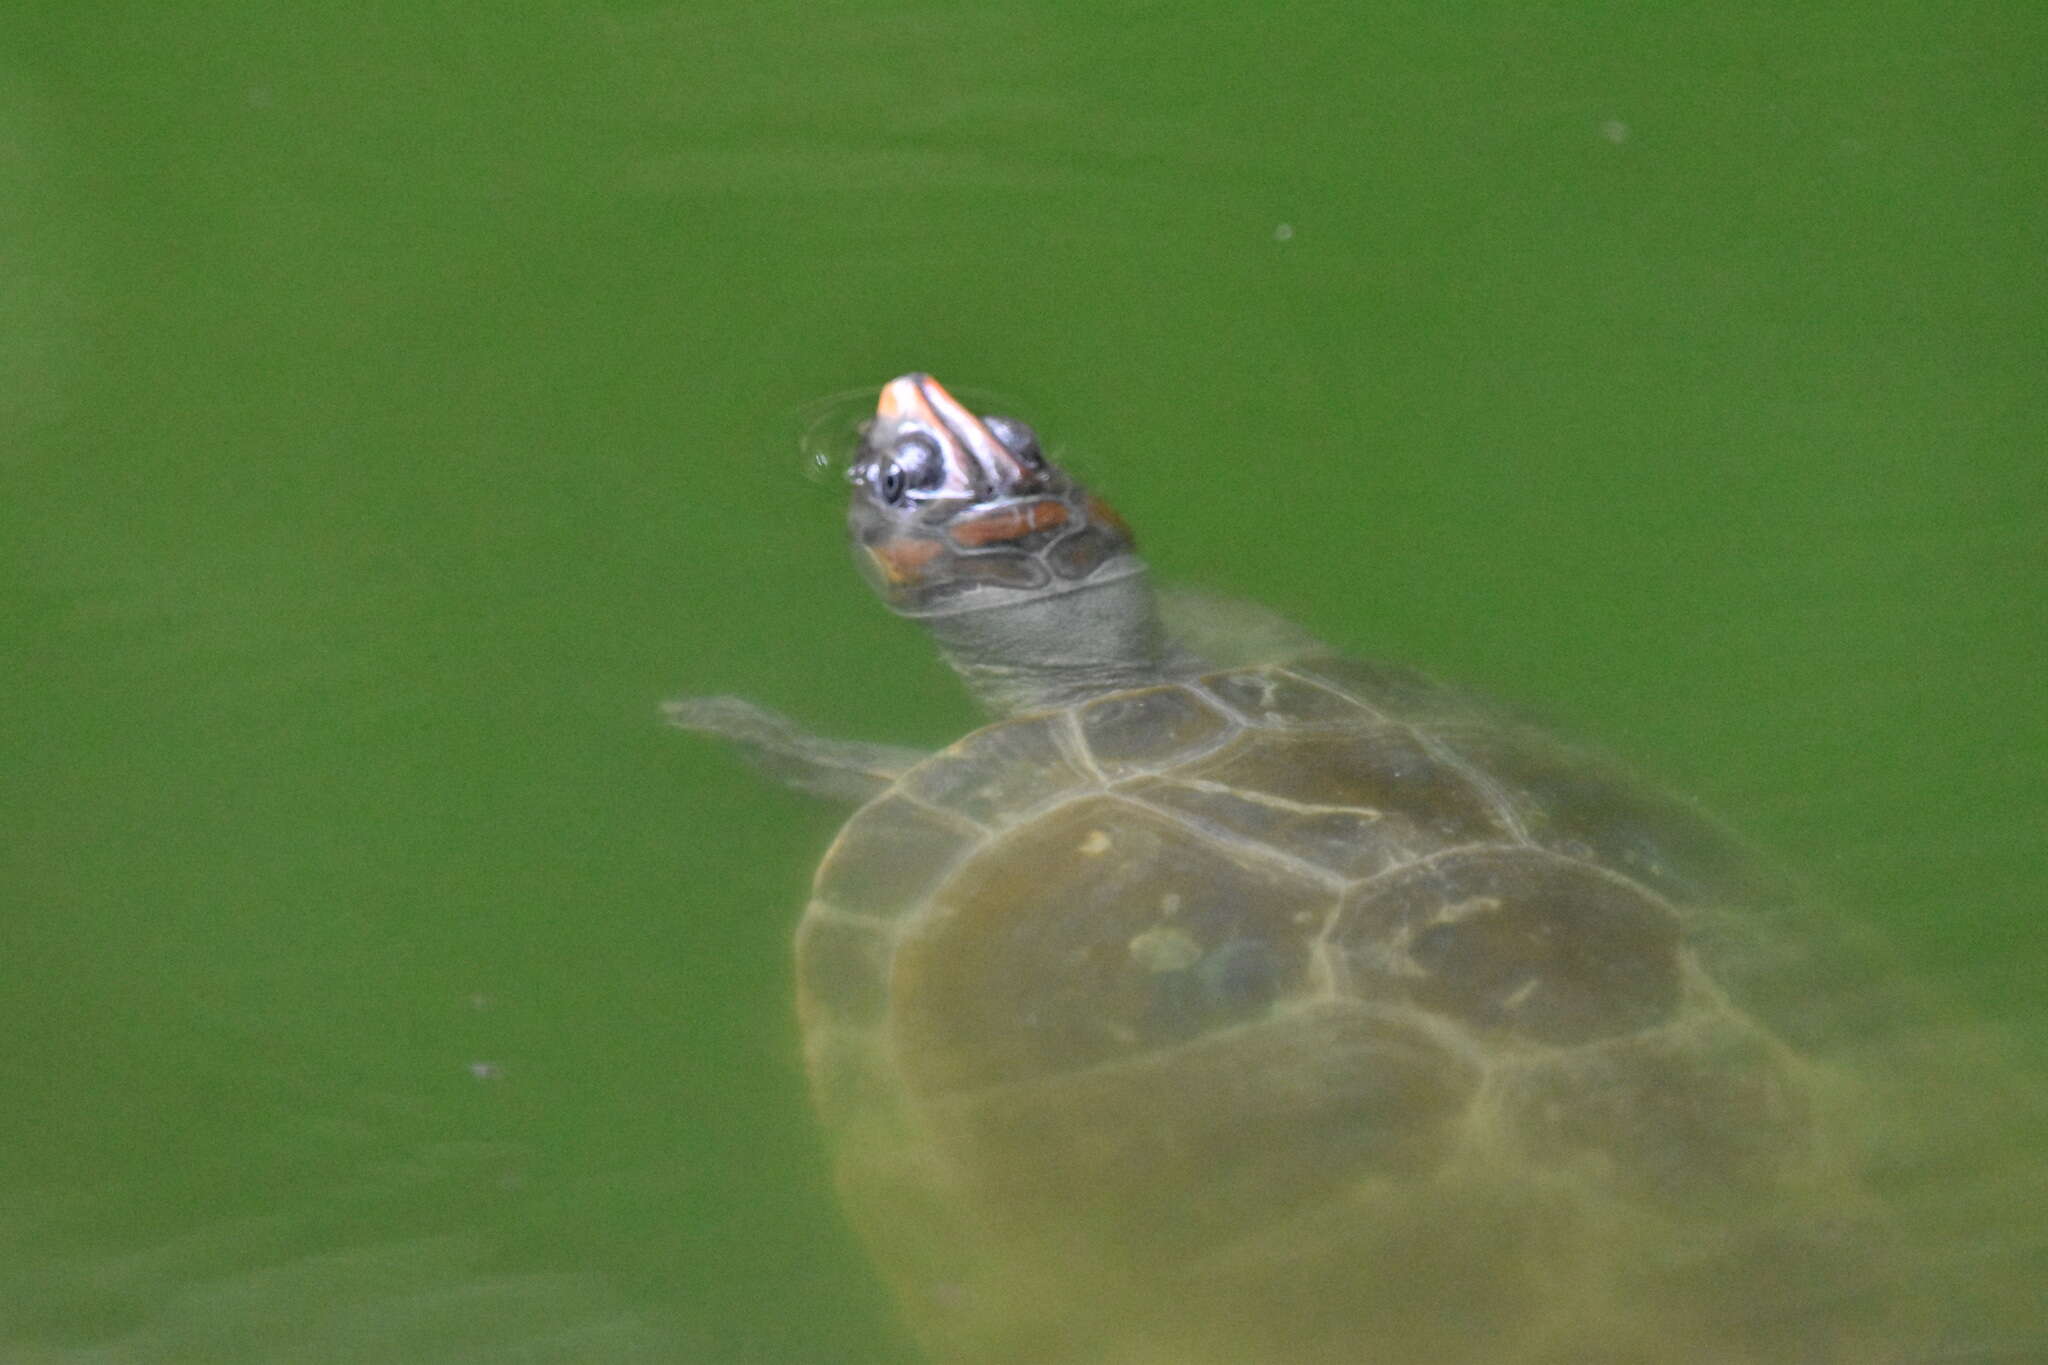 Image of Red-headed Amazon River Turtle